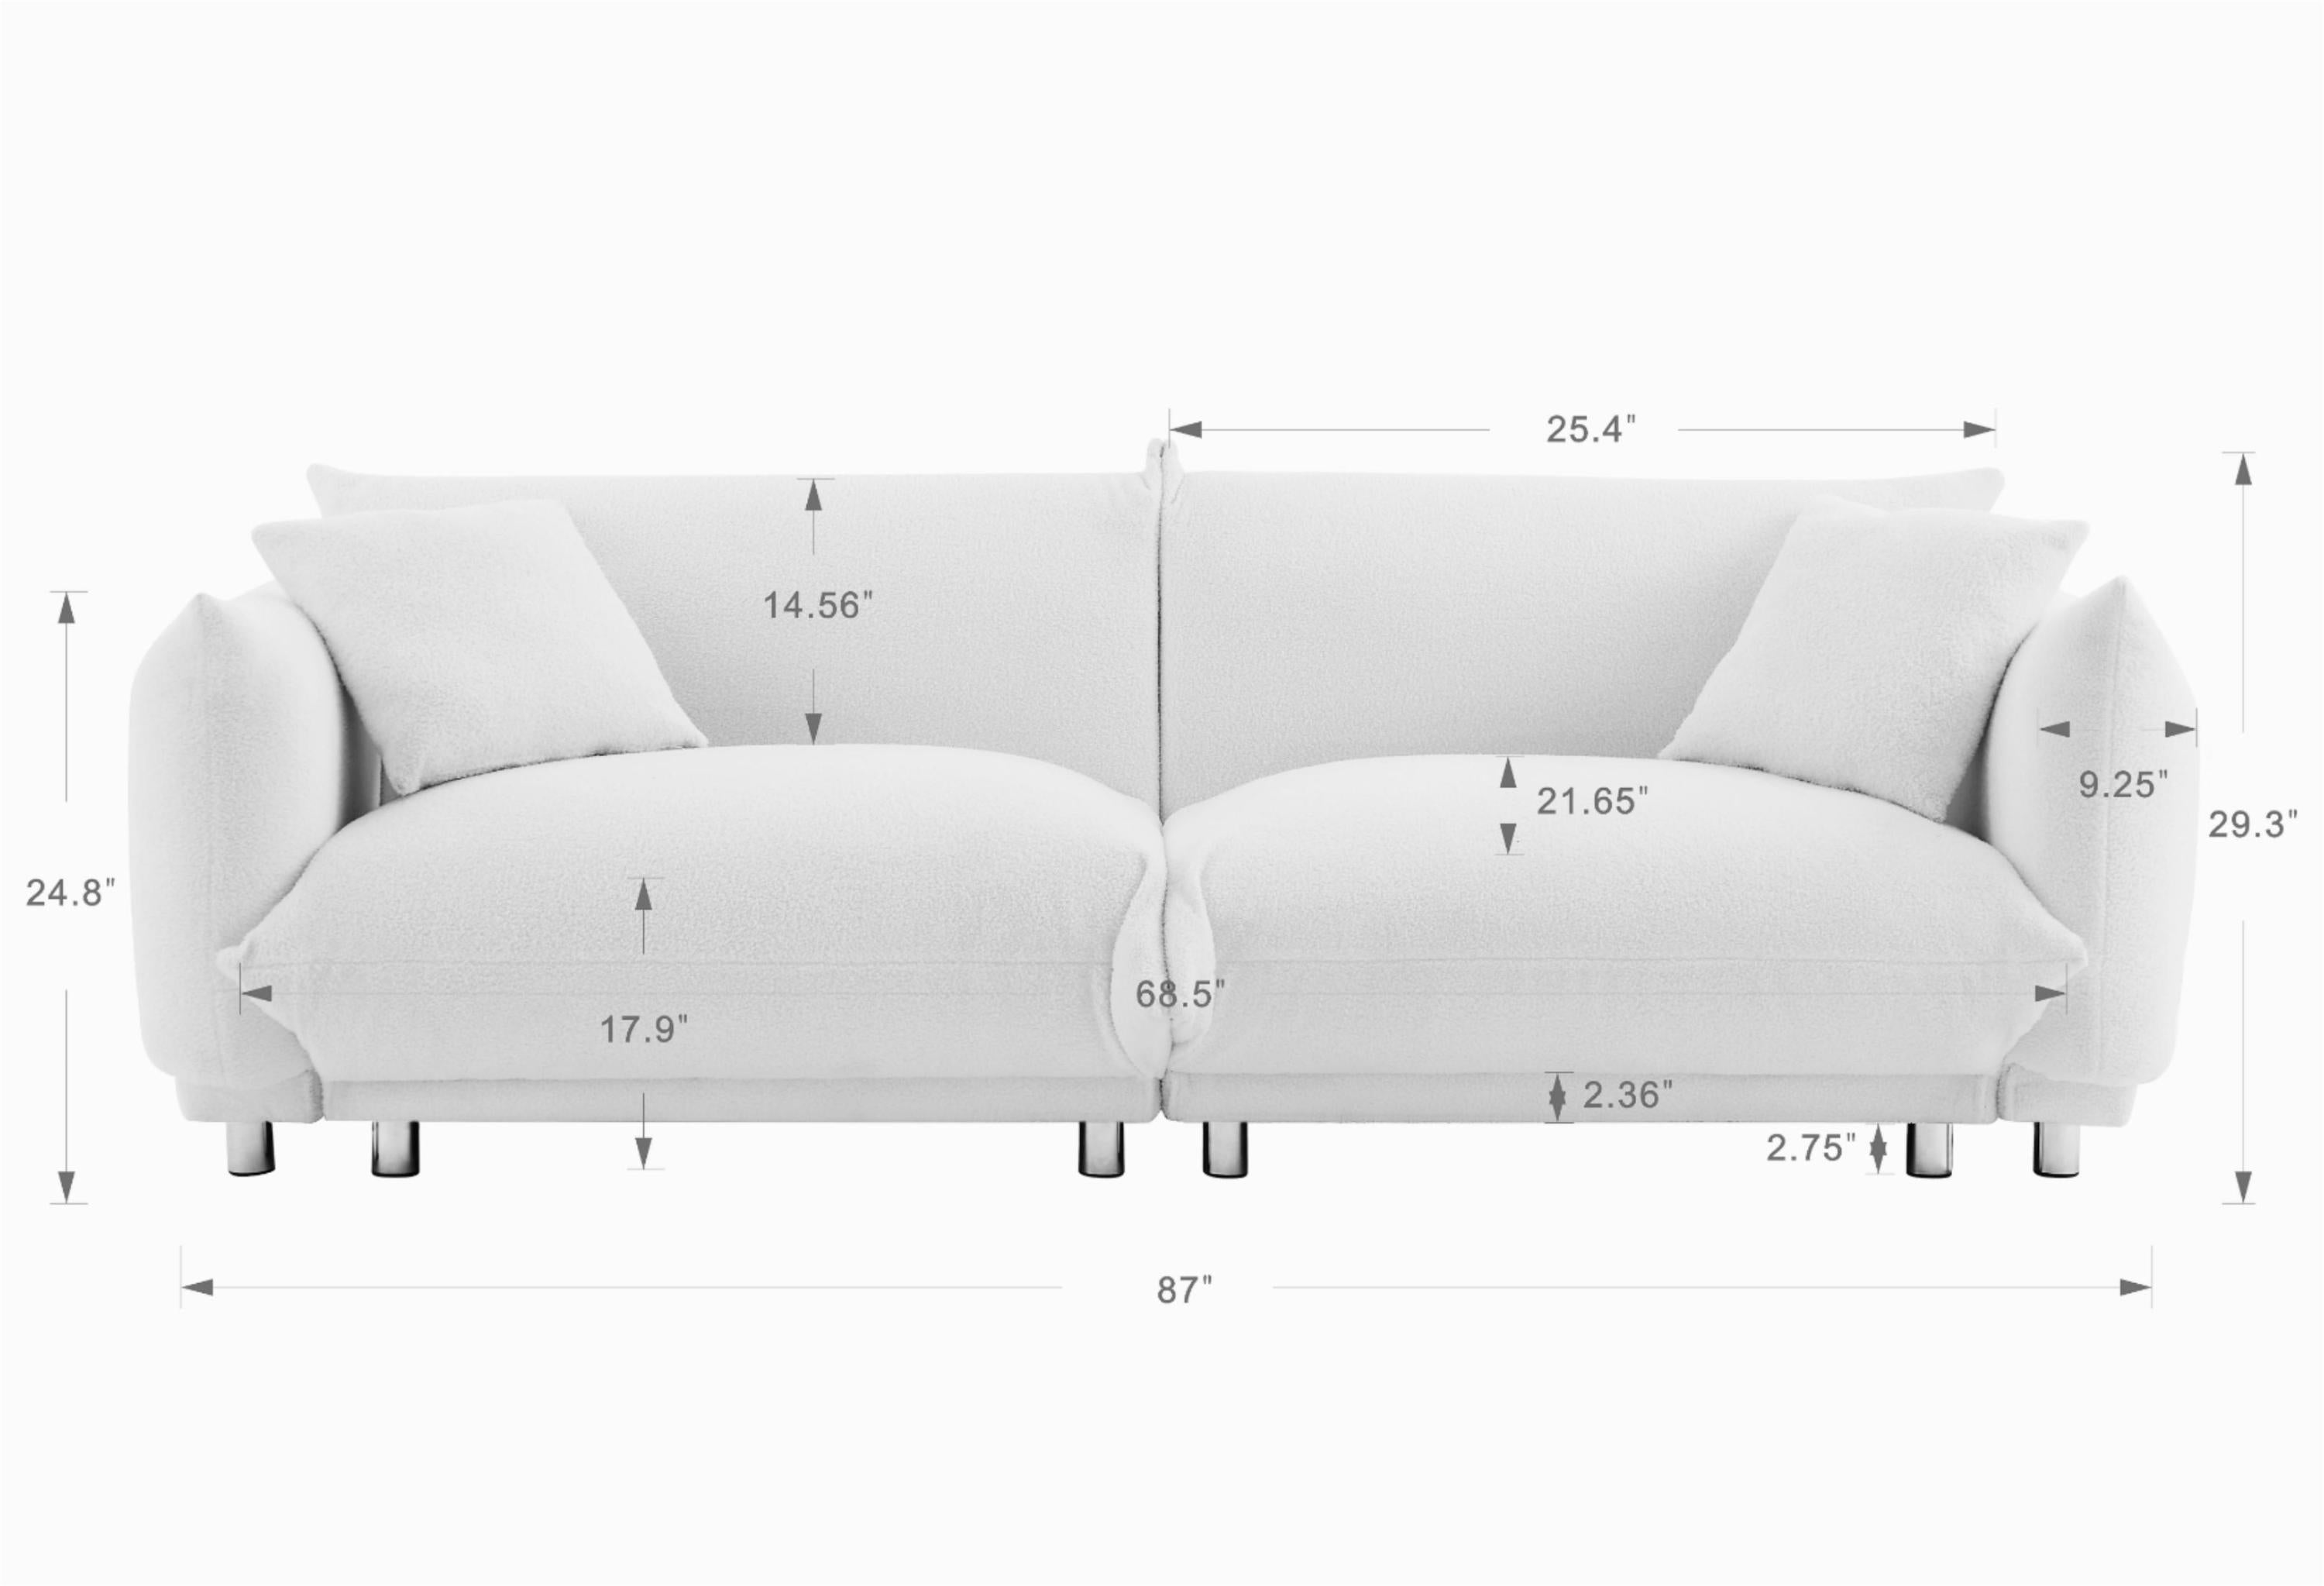 A Lovable Sofa with 2 Pillows and Metal Feet - Beige